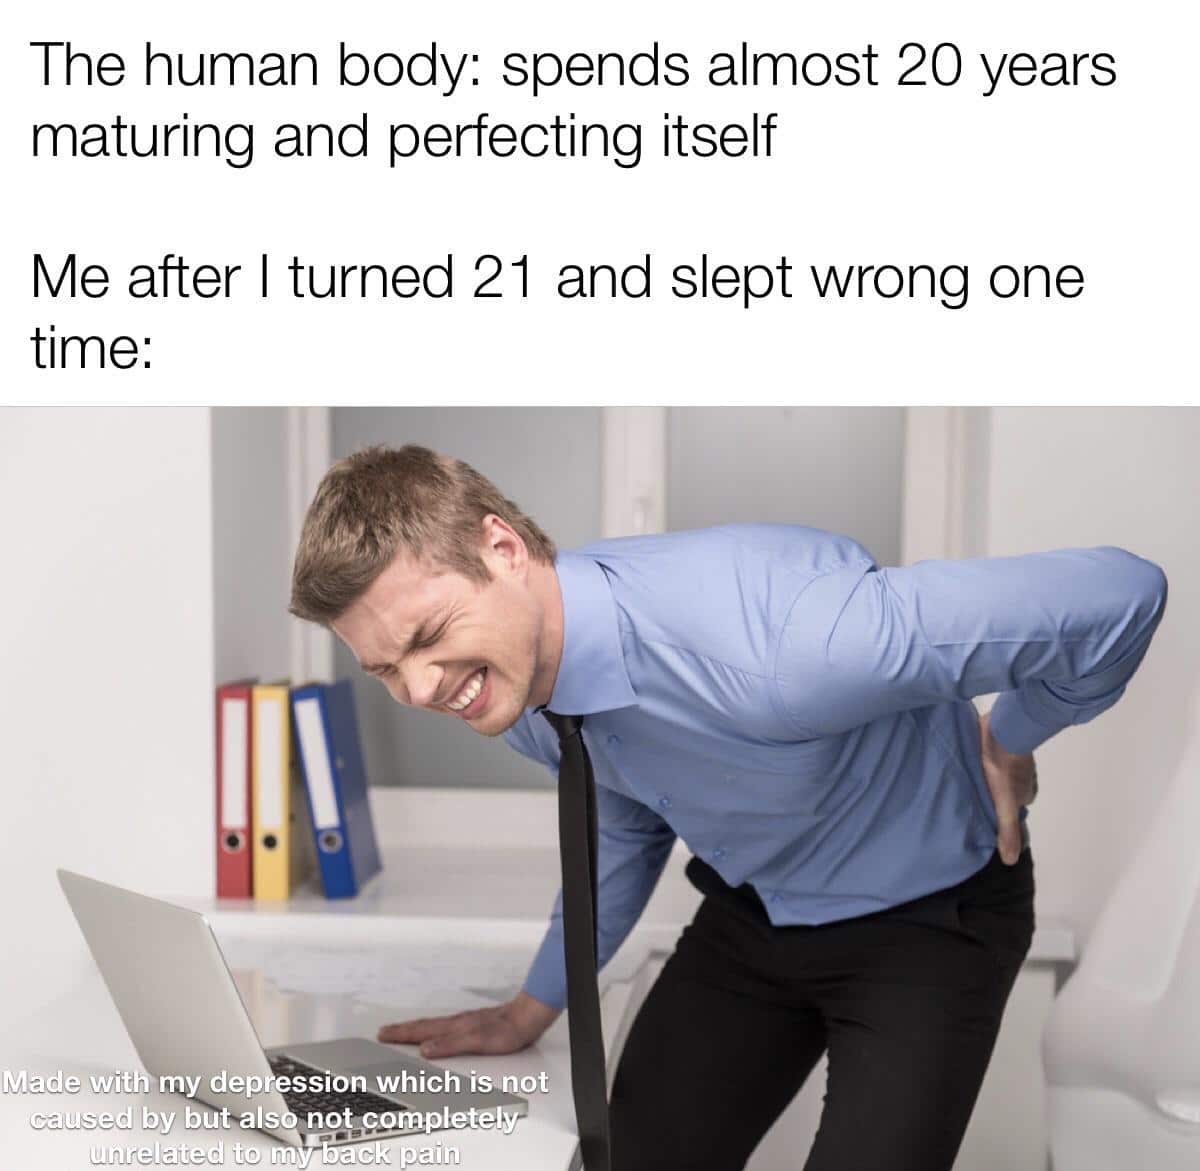 Funny, Wait, LoL, Does other memes Funny, Wait, LoL, Does text: The human body: spends almost 20 years maturing and perfecting itself Me after I turned 21 and slept wrong one time: Mädewit: my de whichéöot by but alö notcompletél 